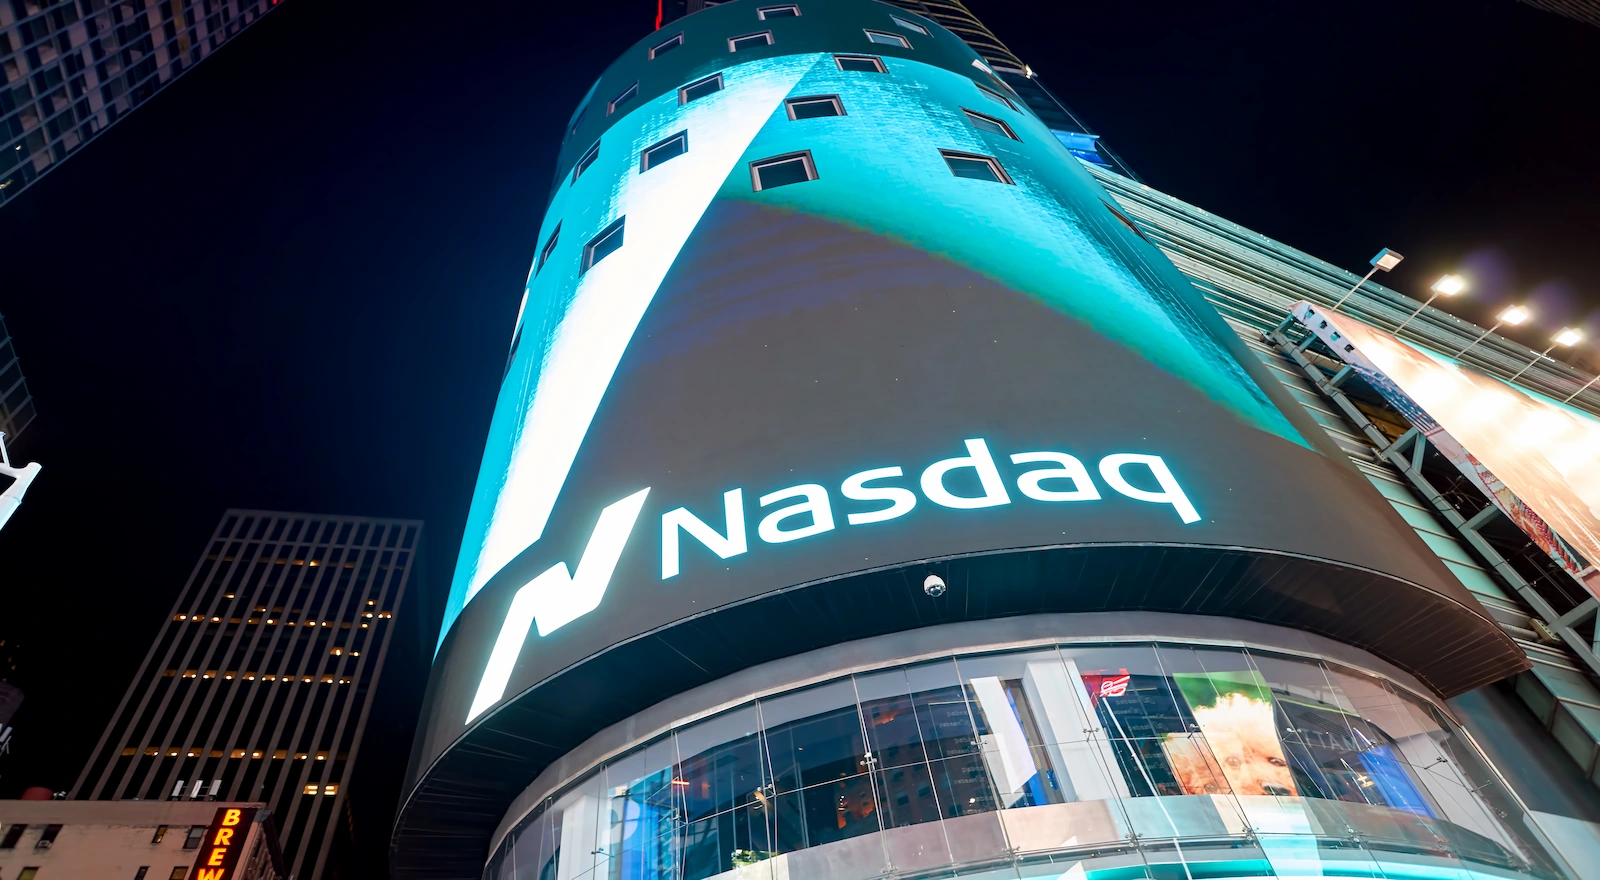 Nasdaq announced that it plans to shutter the launch of its crypto custody business